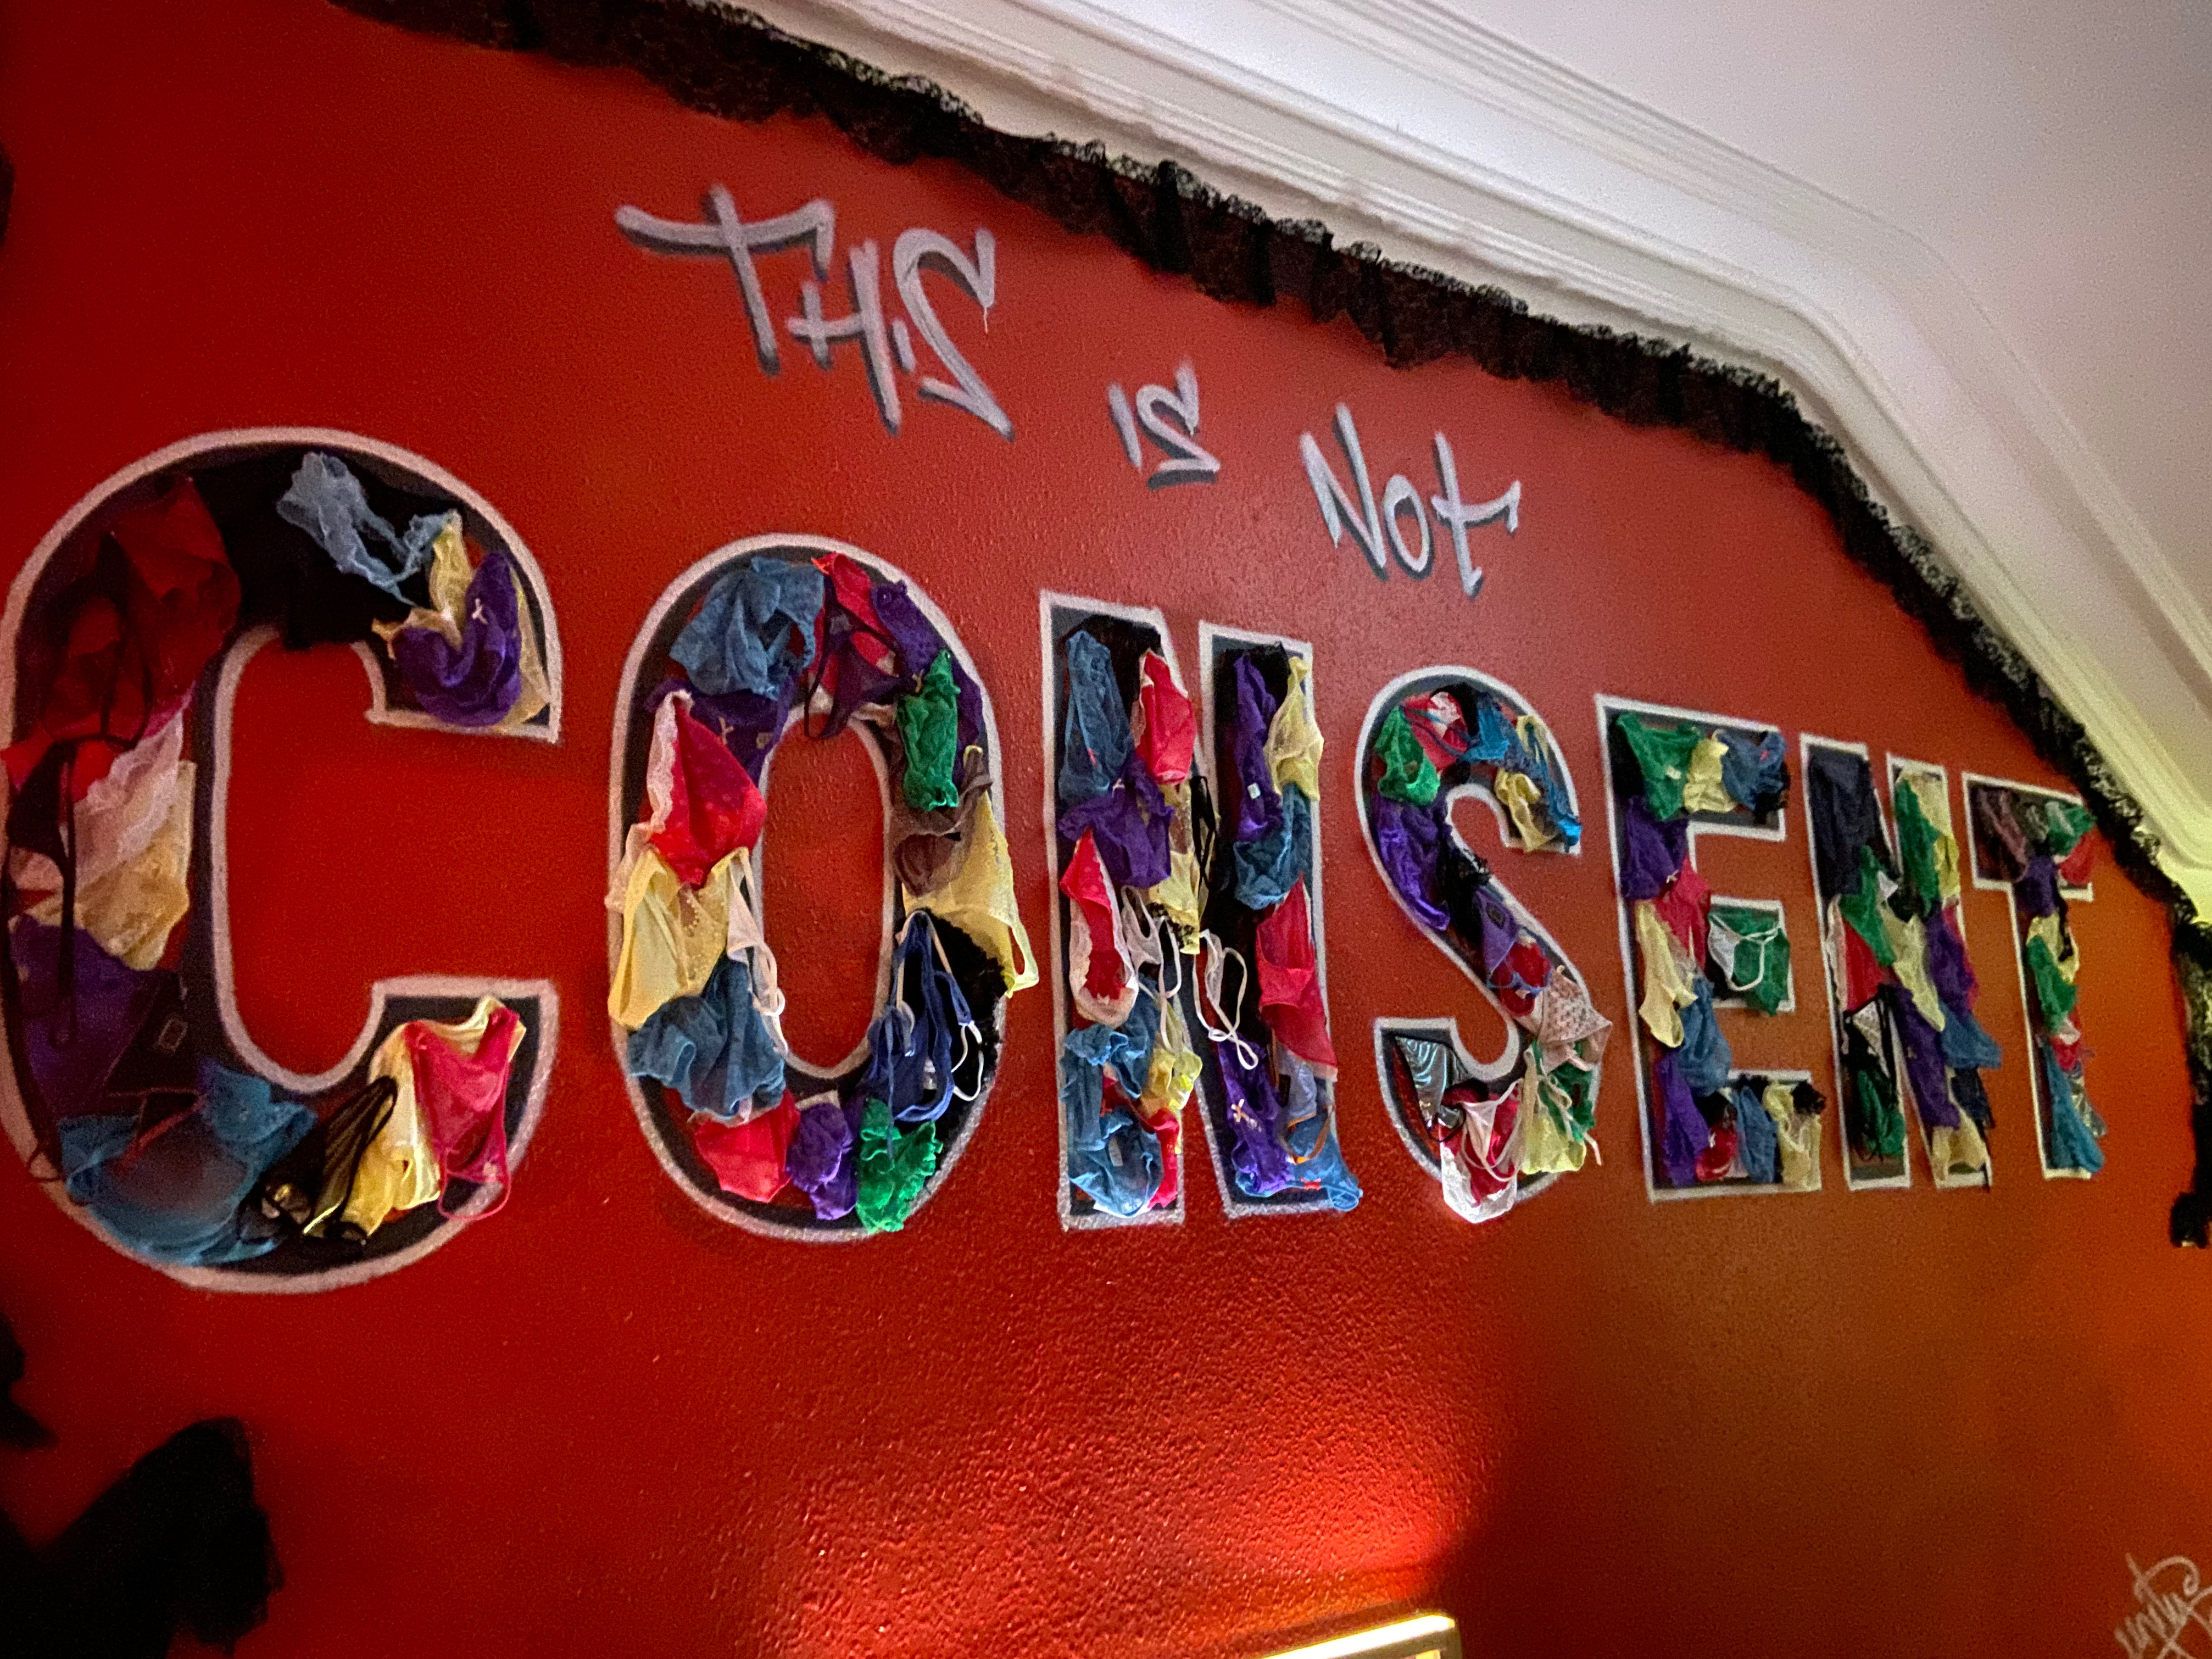 Women's underwear is pinned on the wall to fill in the word consent, in the phrase "this is not consent"